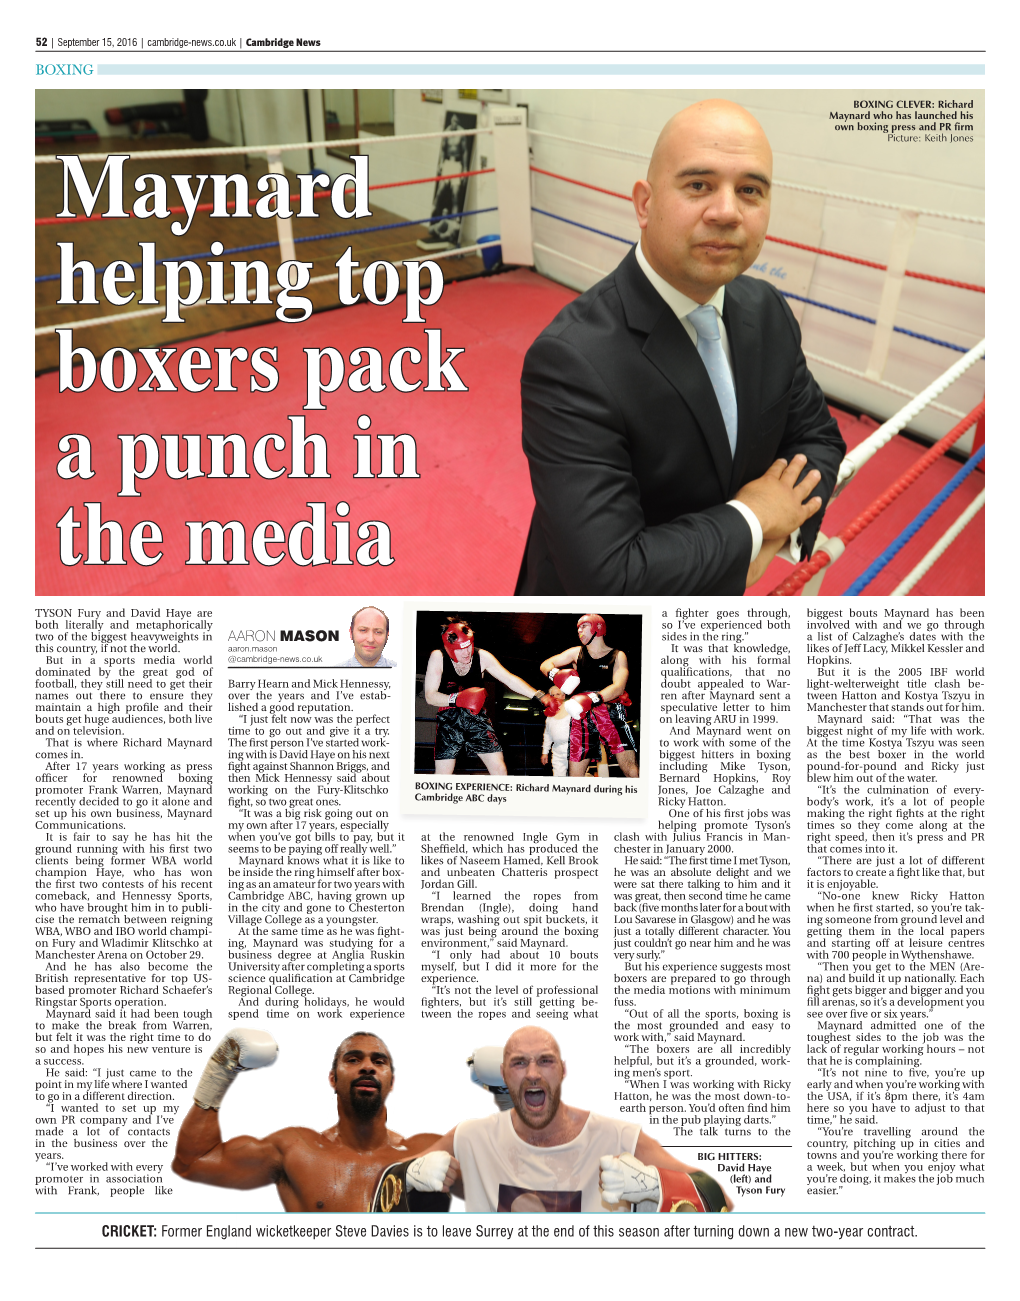 Richard Maynard Who Has Launched His Own Boxing Press and PR Firm Picture: Keith Jones Maynard Helping Top Boxers Pack a Punch in the Media